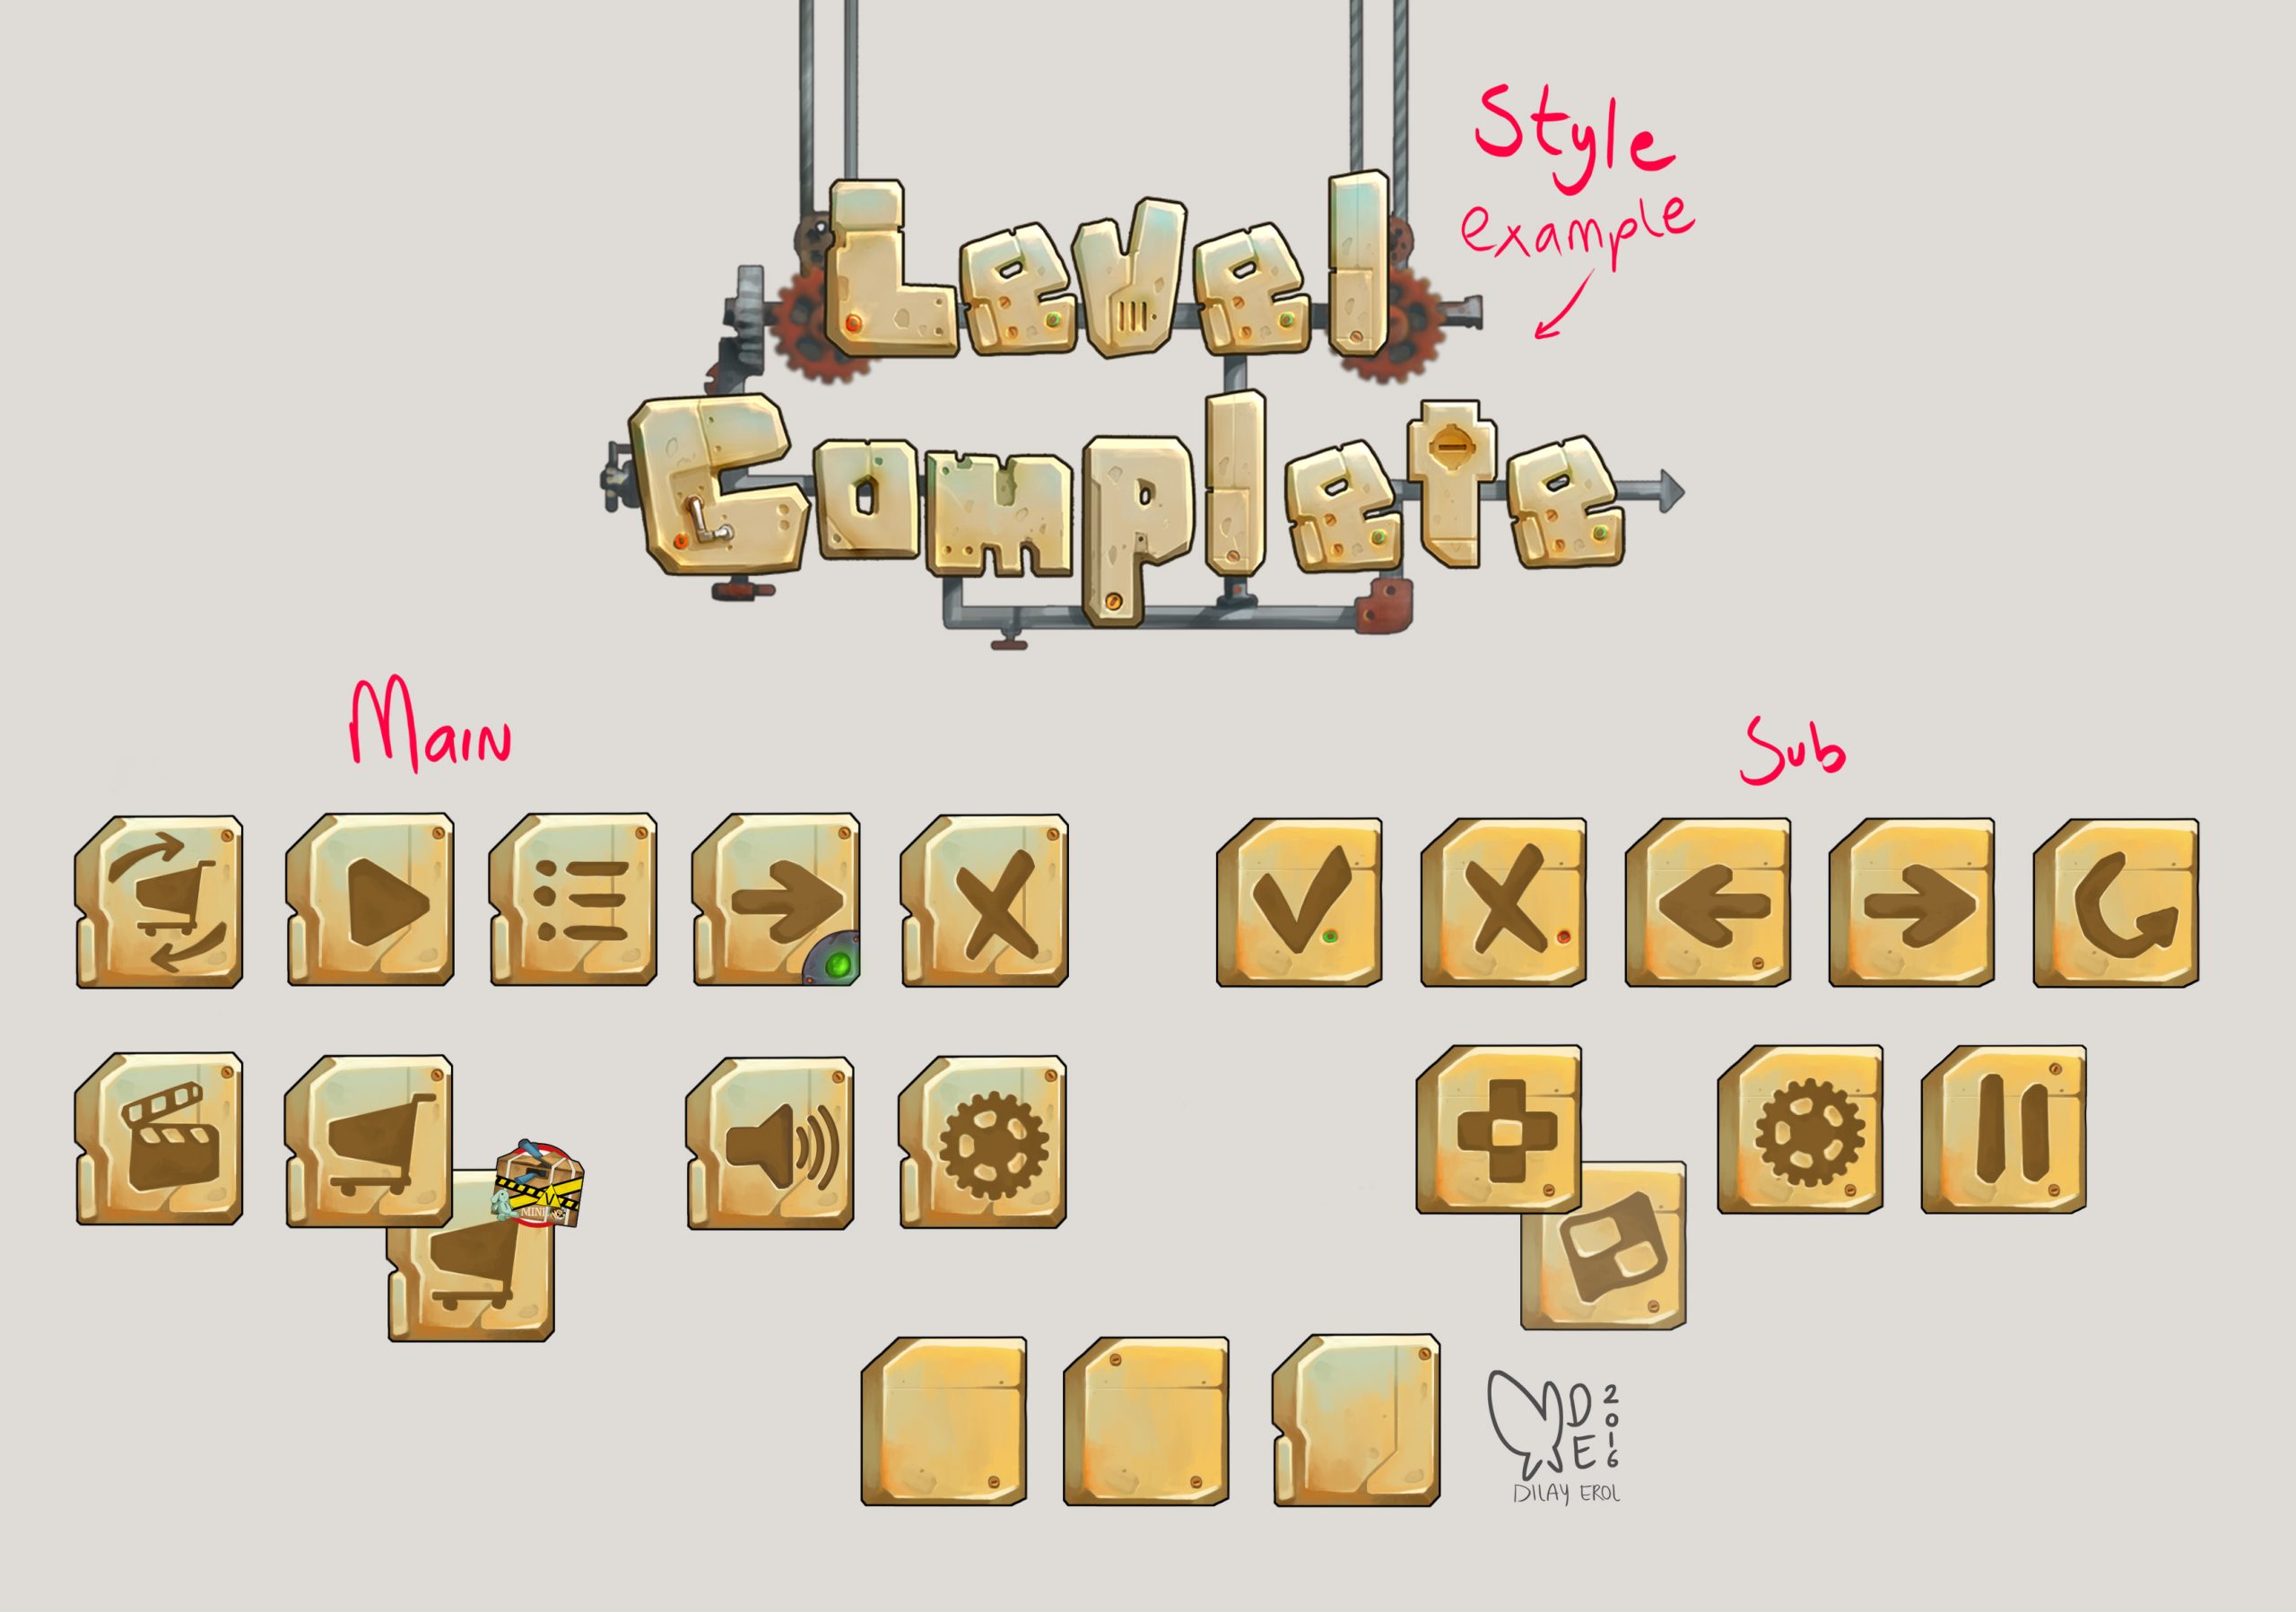 Level Complete screen assets | 2017